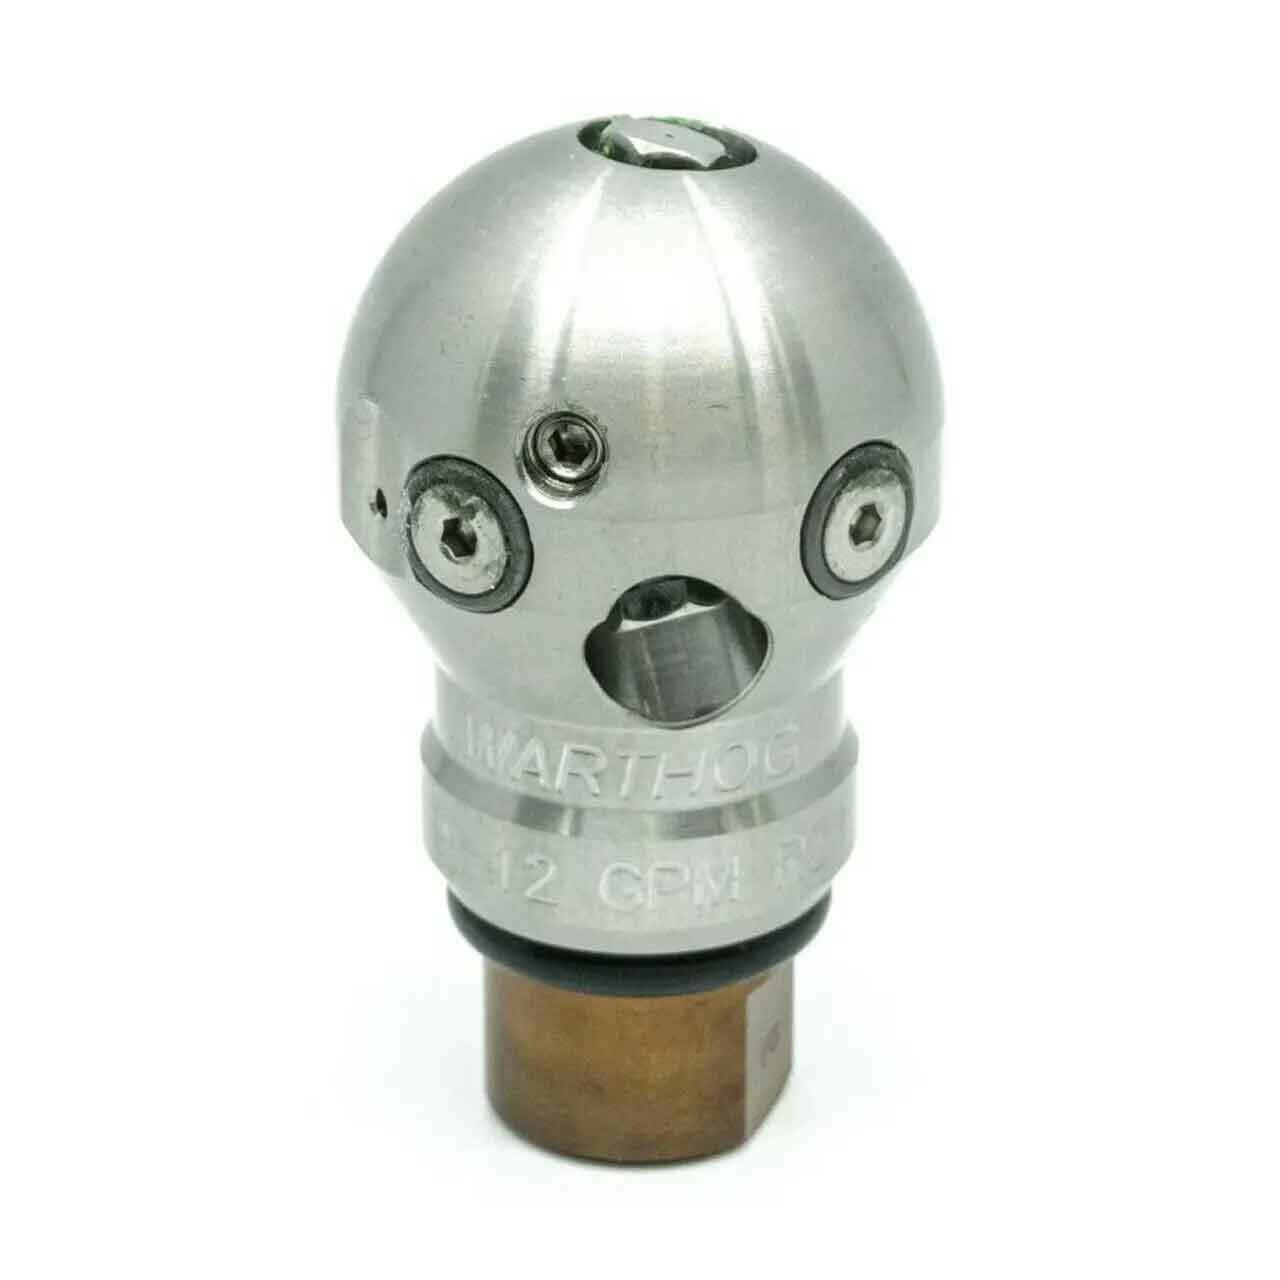 Spartan Tool Jetter Nozzle